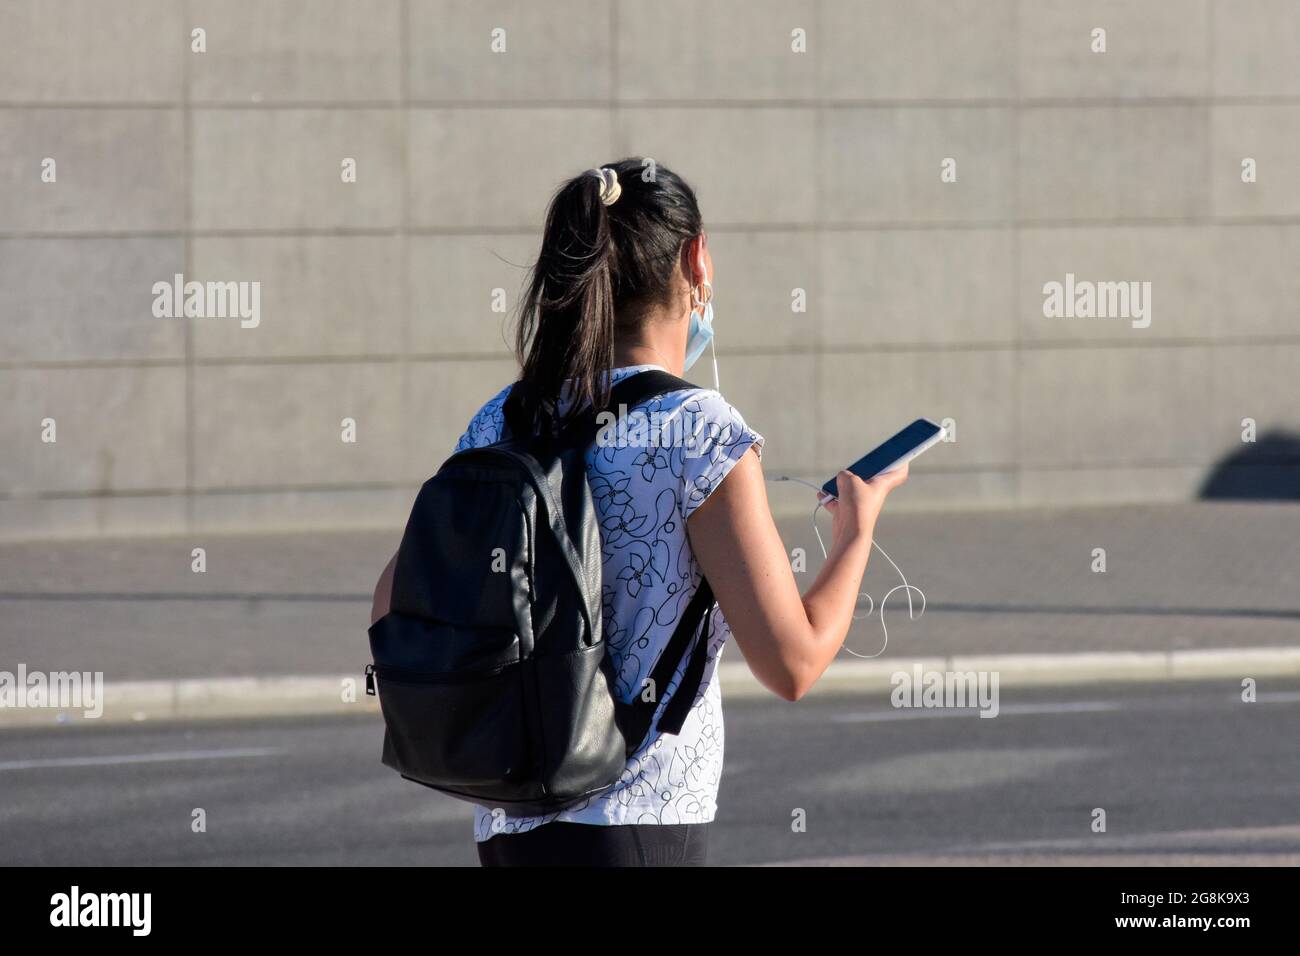 Rear view of a young woman holding a smartphone and listening with an earphones while she is walking in a street. Stock Photo